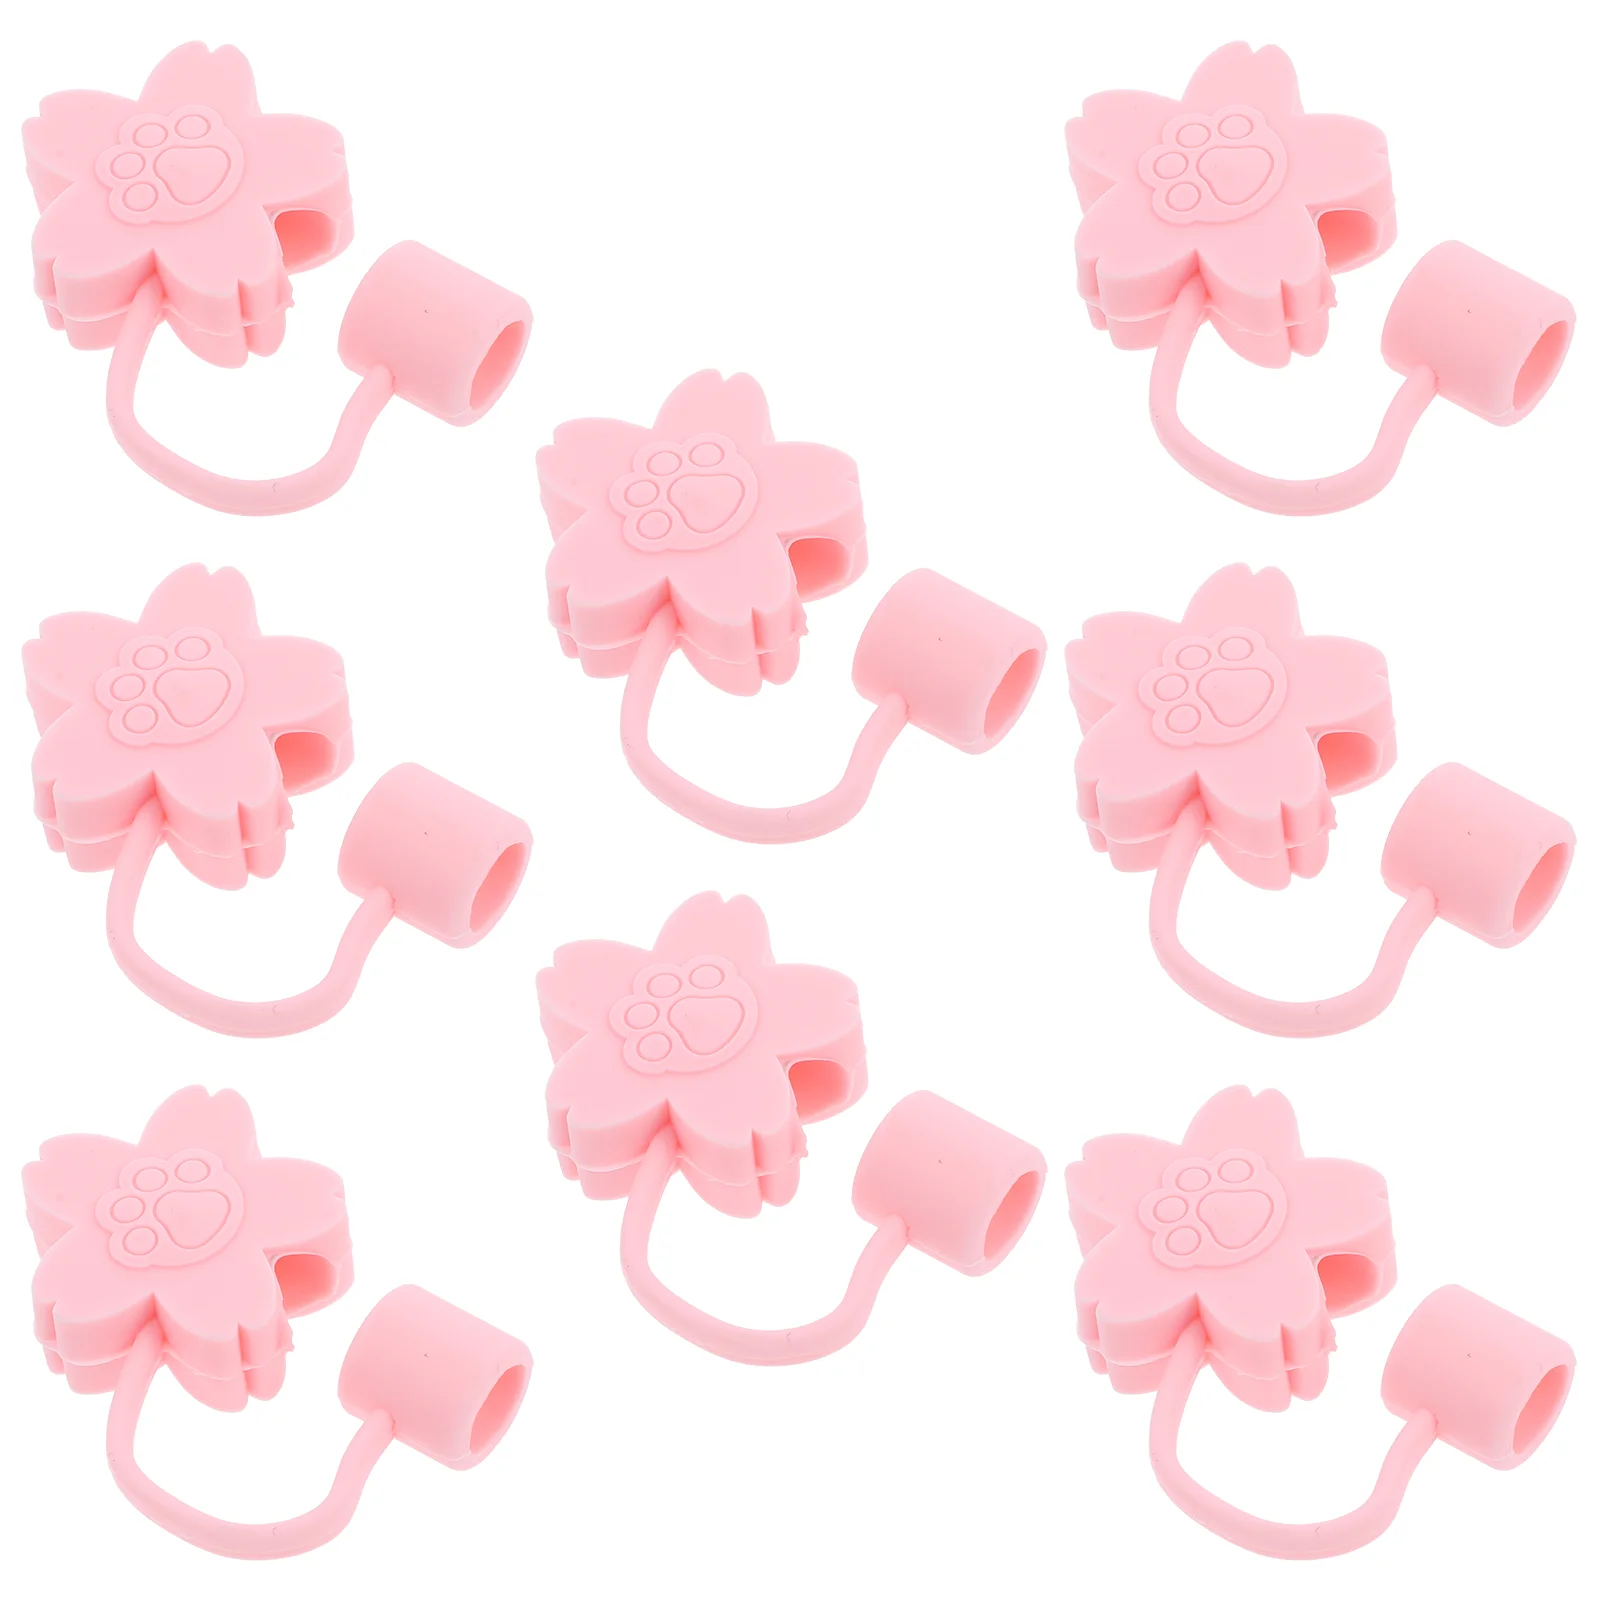 

Straw Adorable Shaped Caps Drinking Cover Straw Tip Plugs Jelly Straws Silicone Tips Straw Dust Cap Straw Top Cover